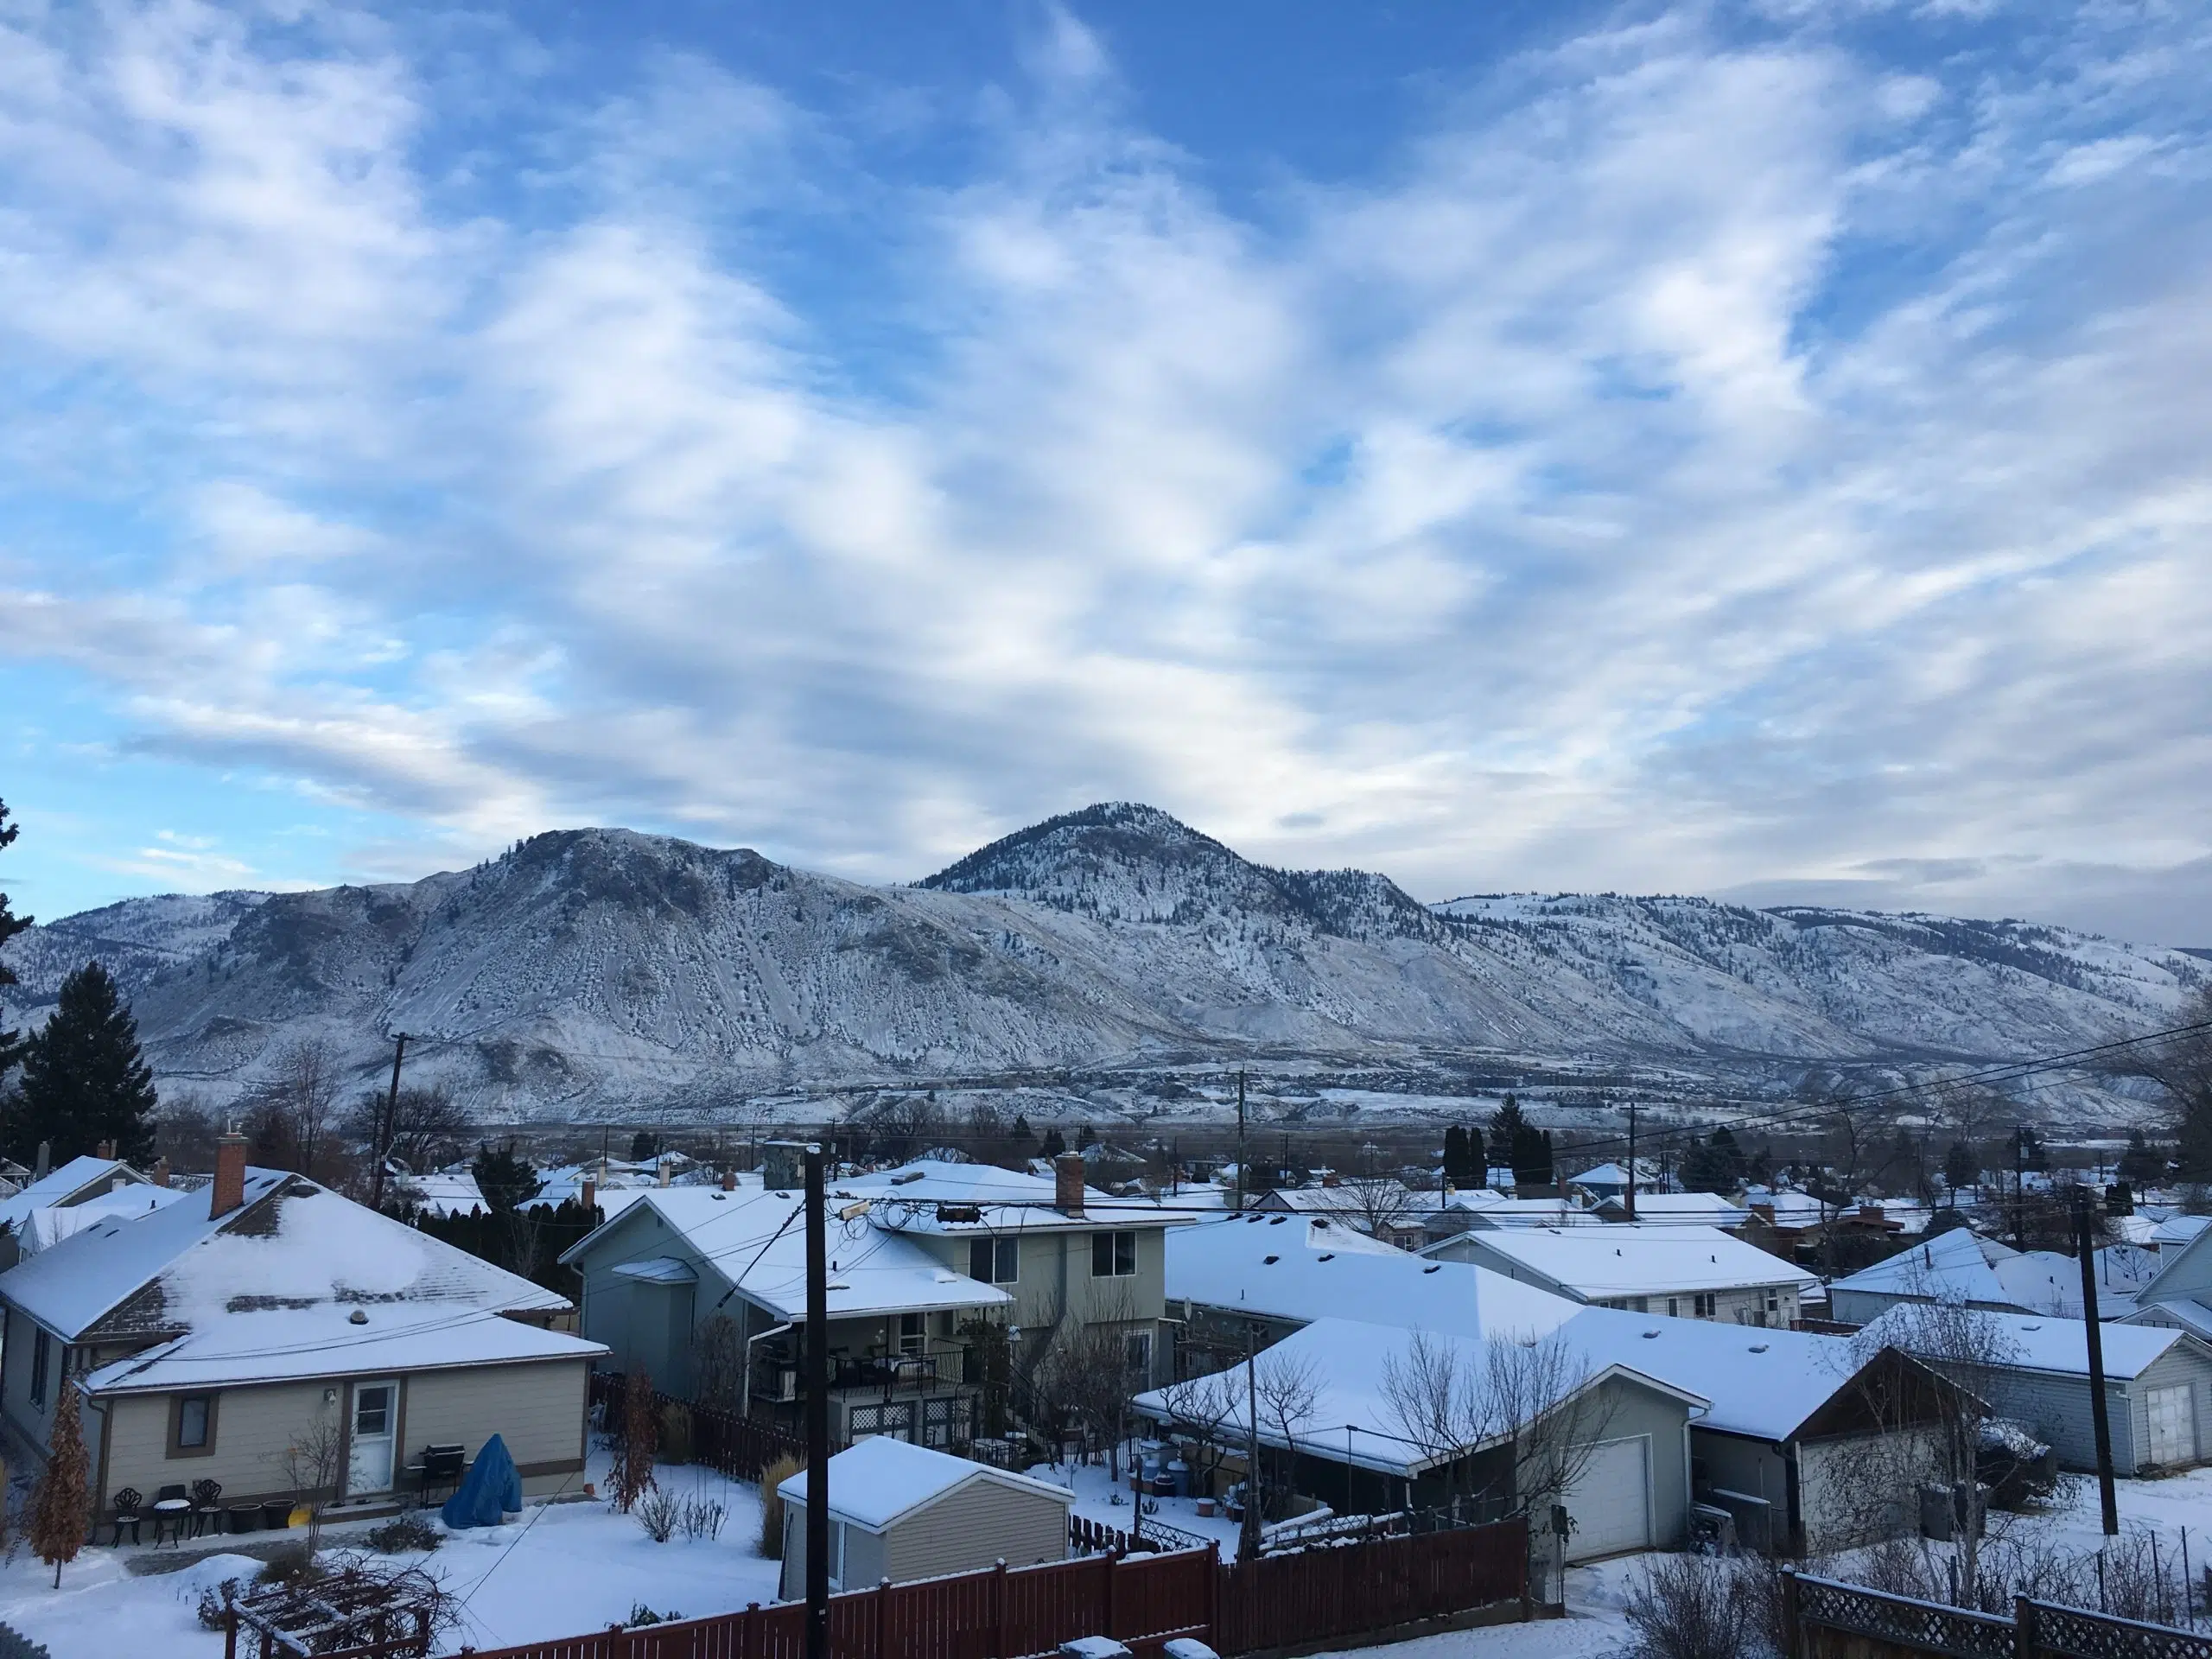 More snow for the Kamloops region